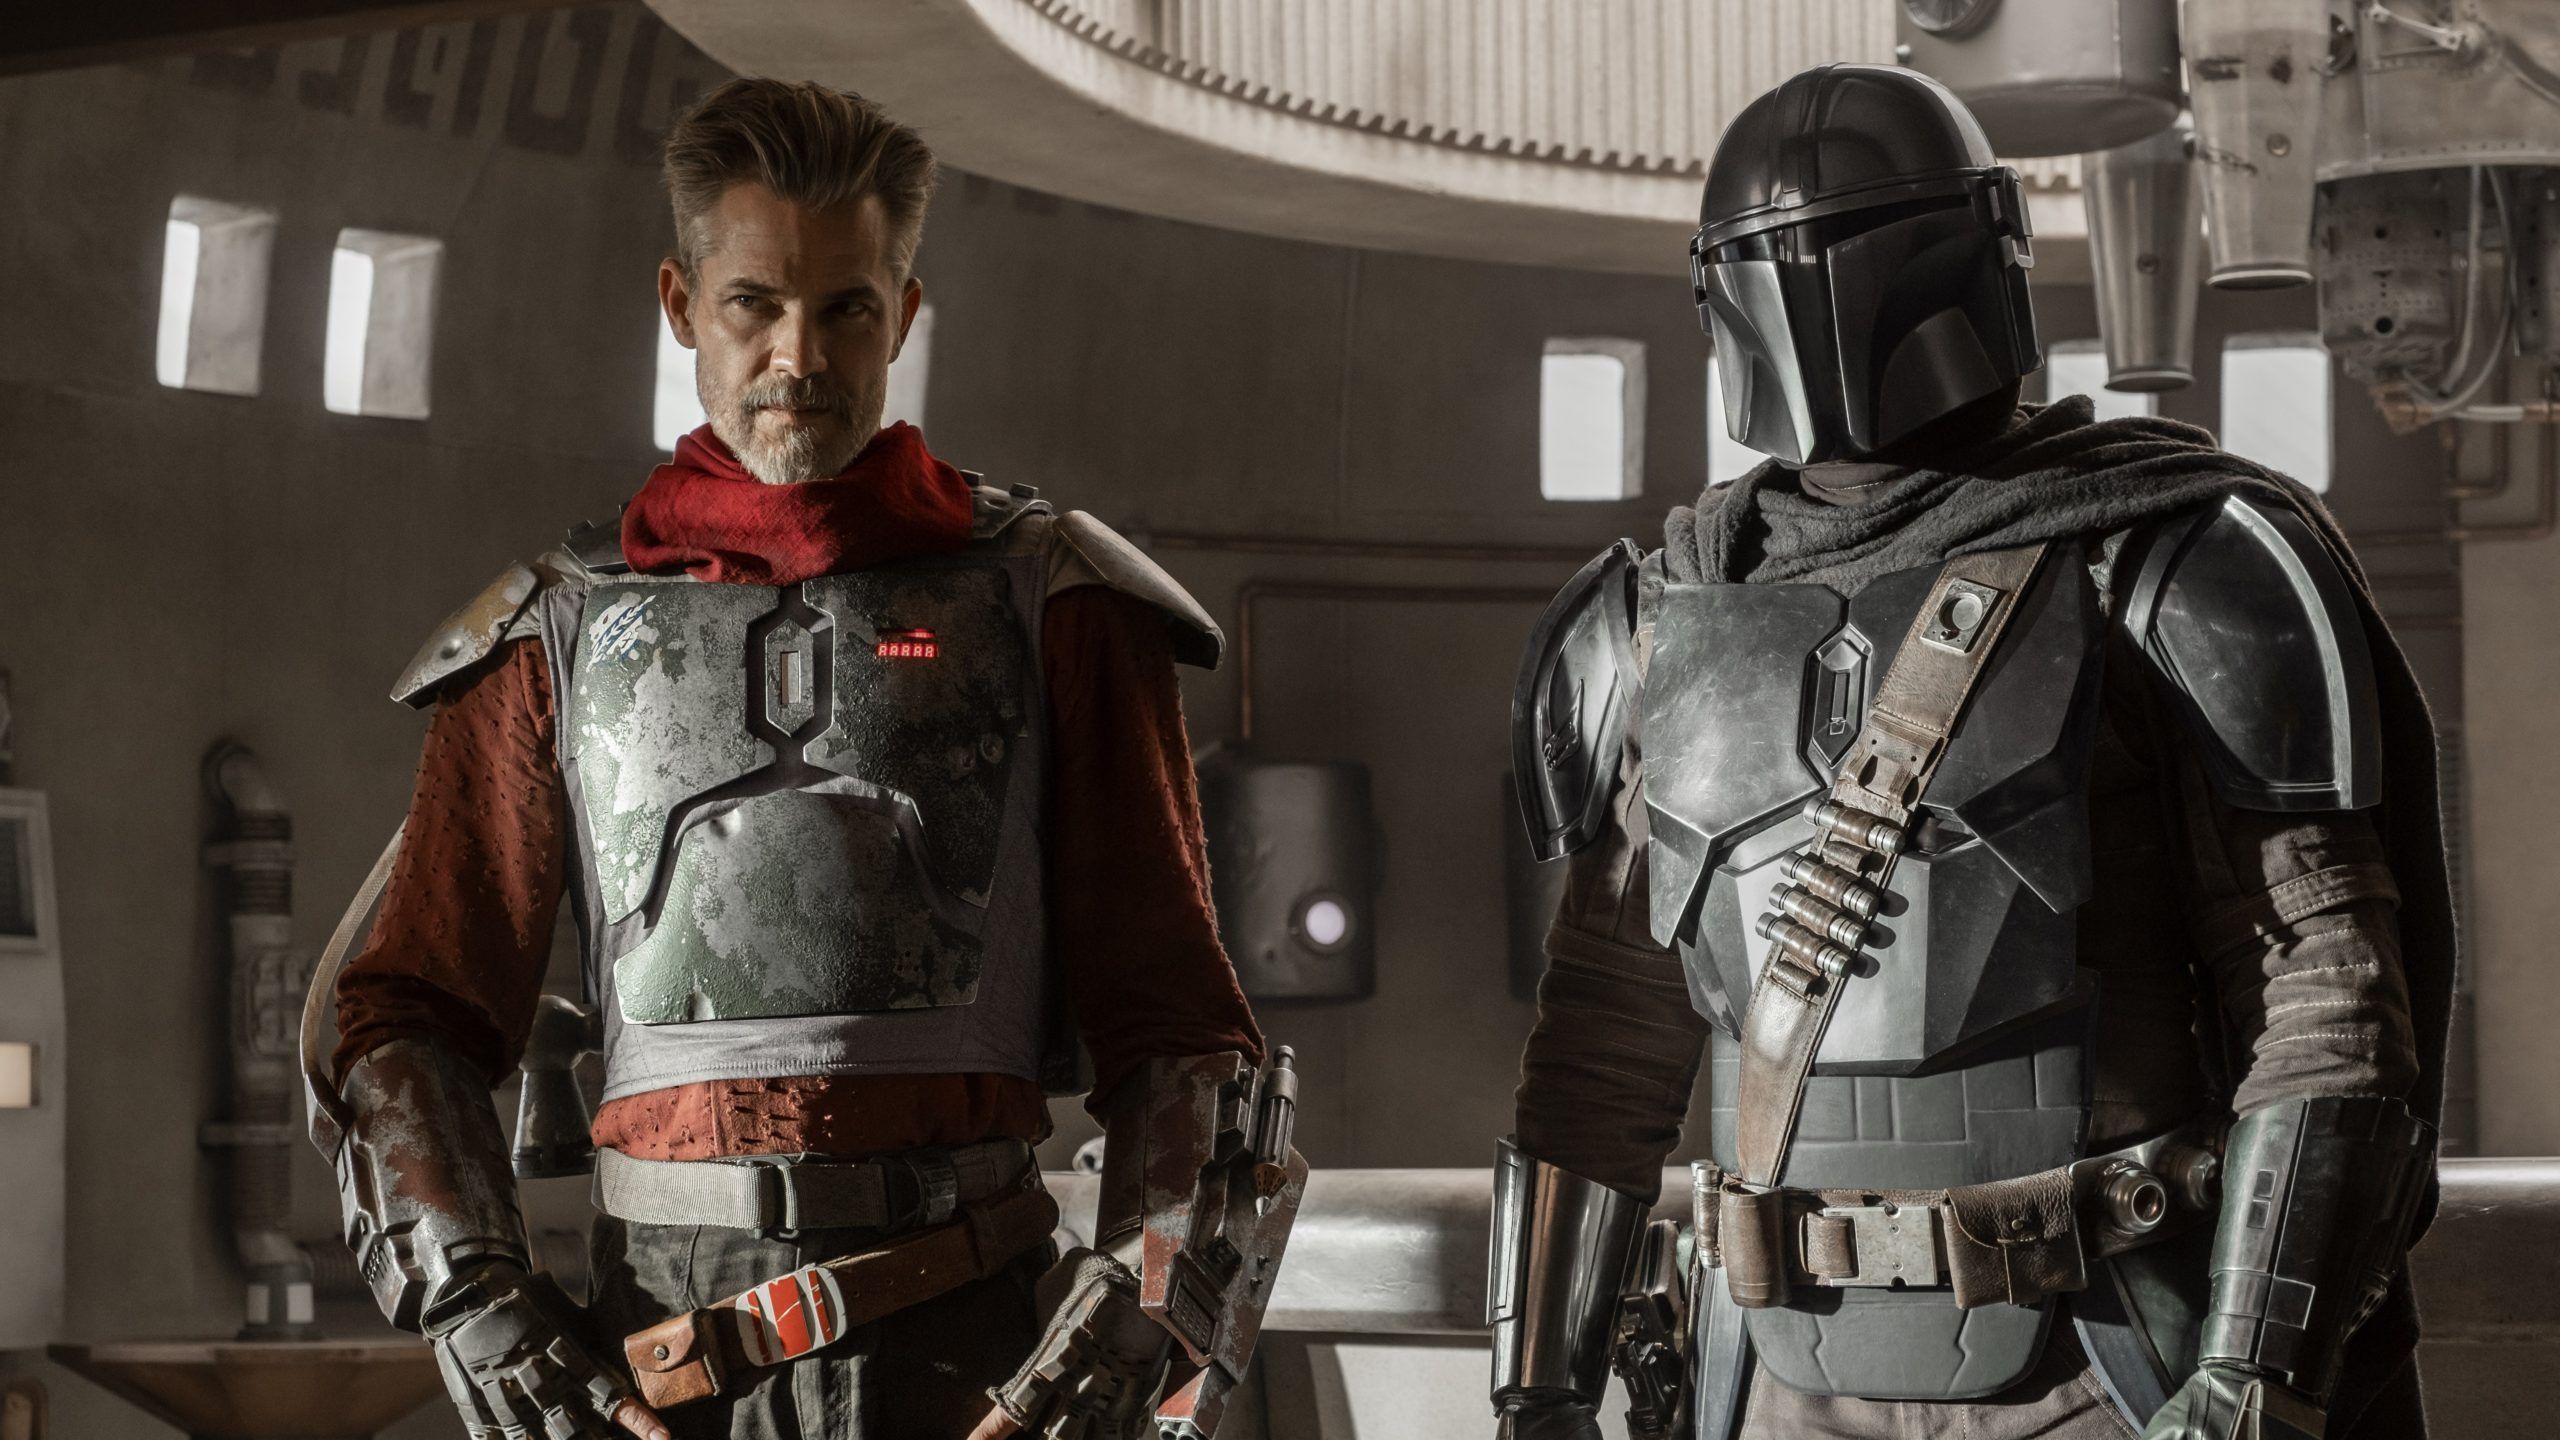 When will Season 2 Episode 3 of The Mandalorian be released on Disney Plus?